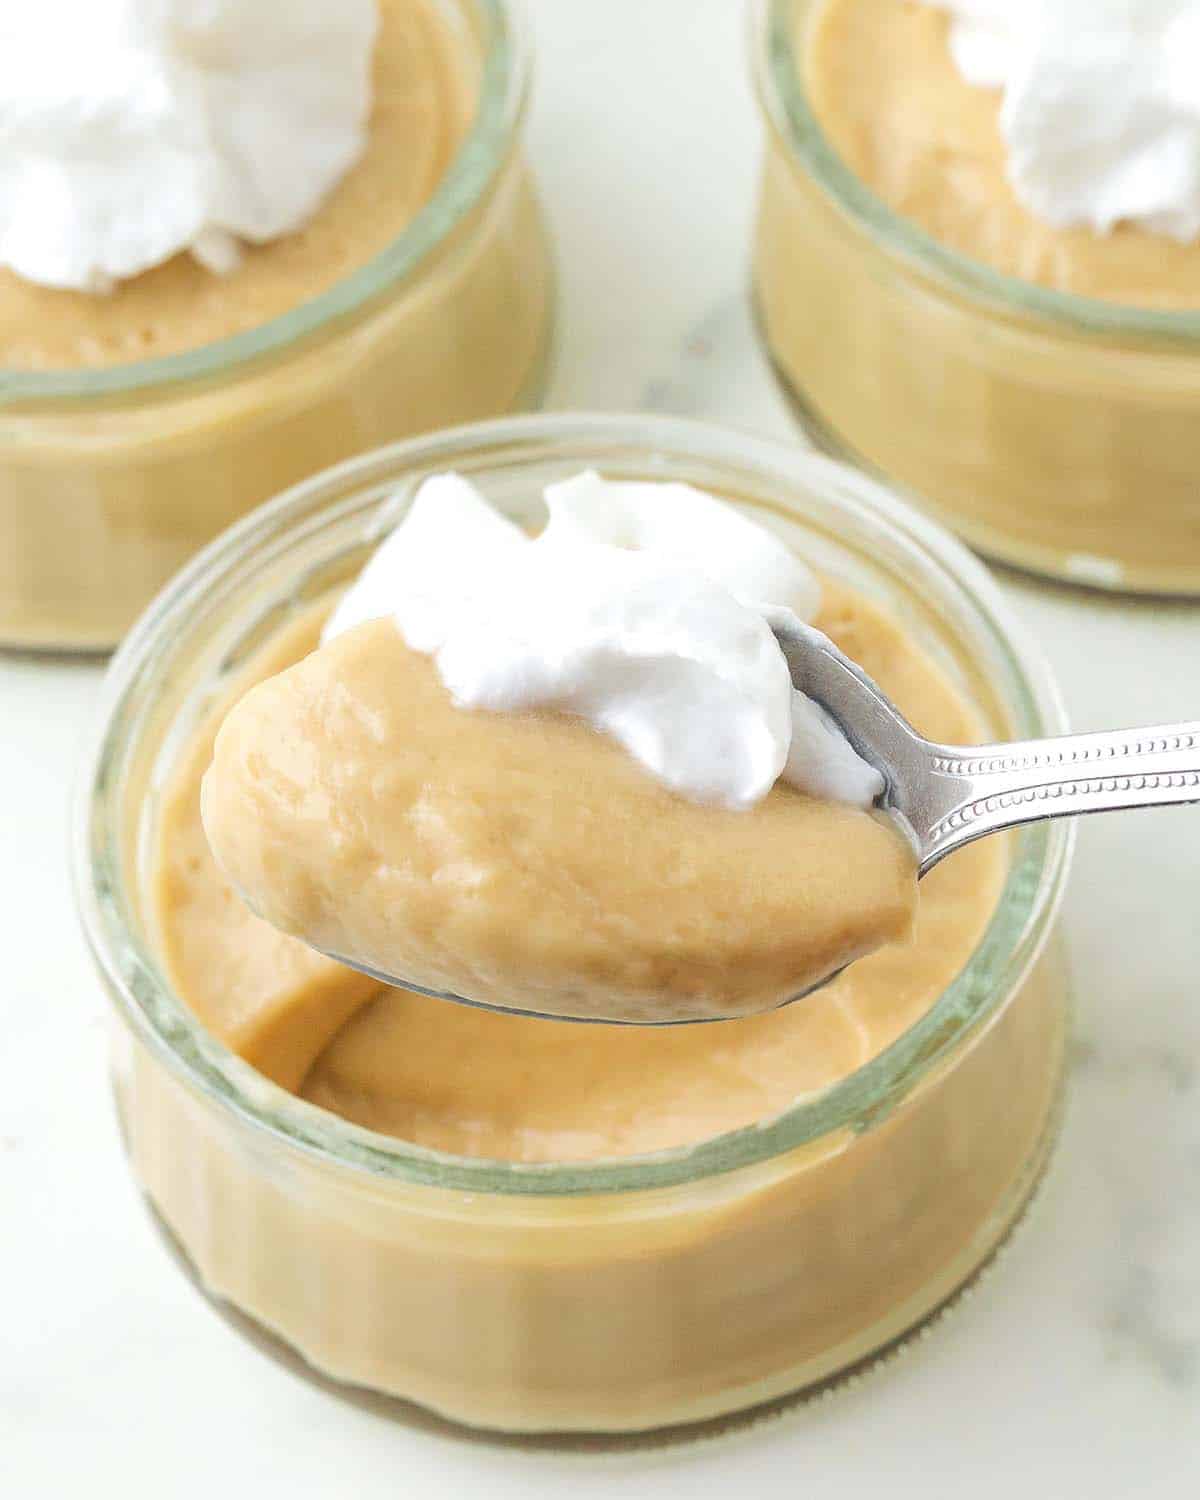 Butterscotch pudding and whipped cream on a spoon.